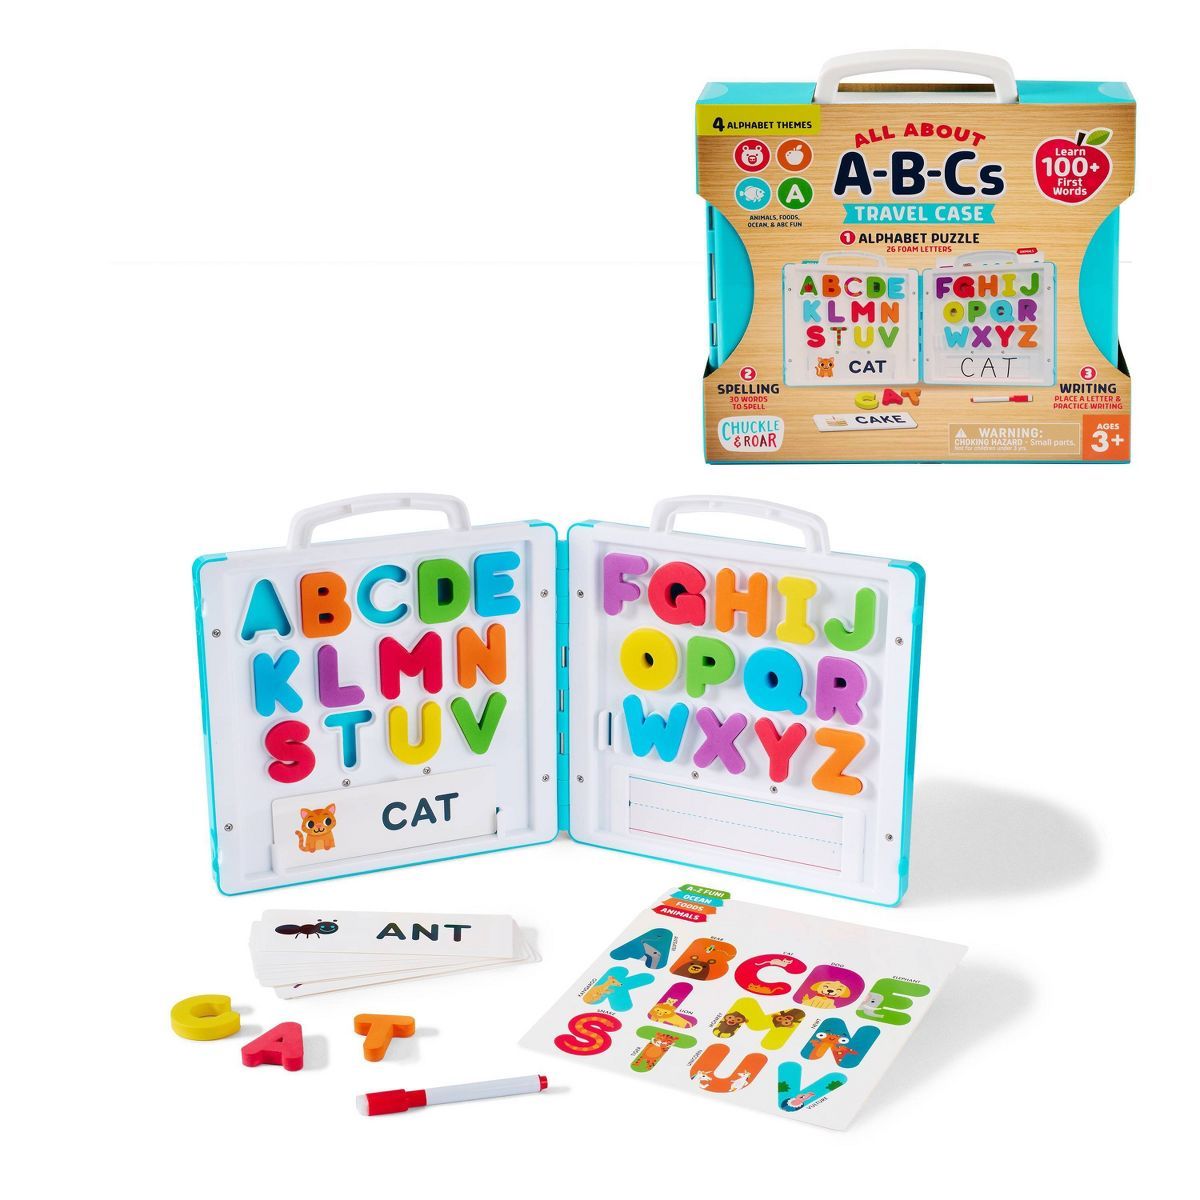 Chuckle & Roar All About ABC's Travel Case | Target